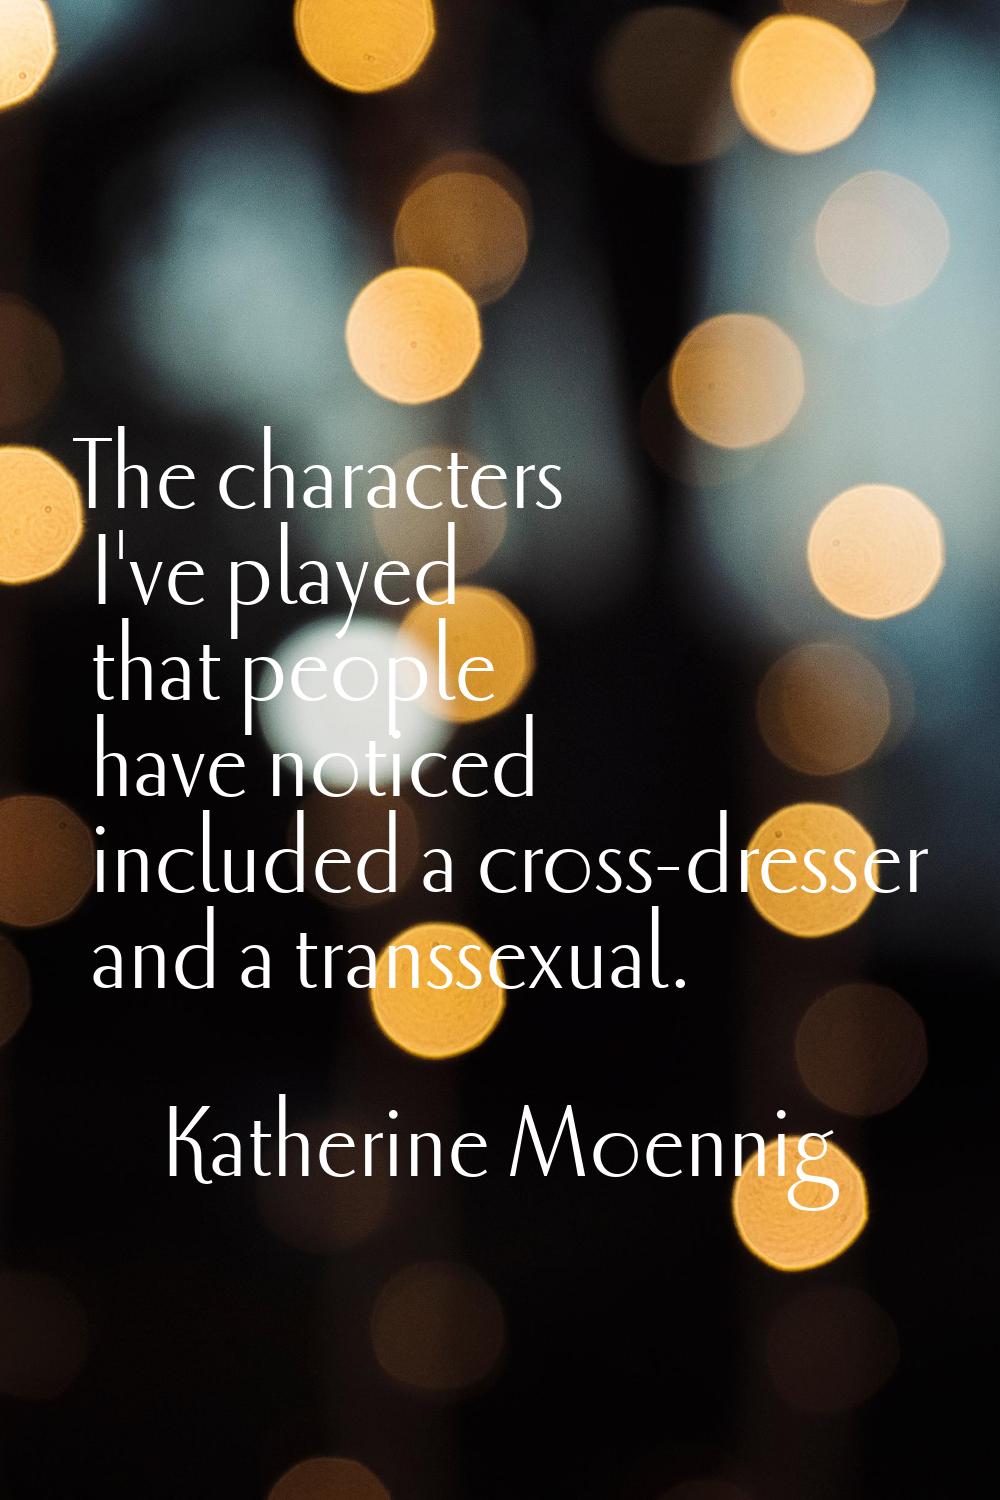 The characters I've played that people have noticed included a cross-dresser and a transsexual.